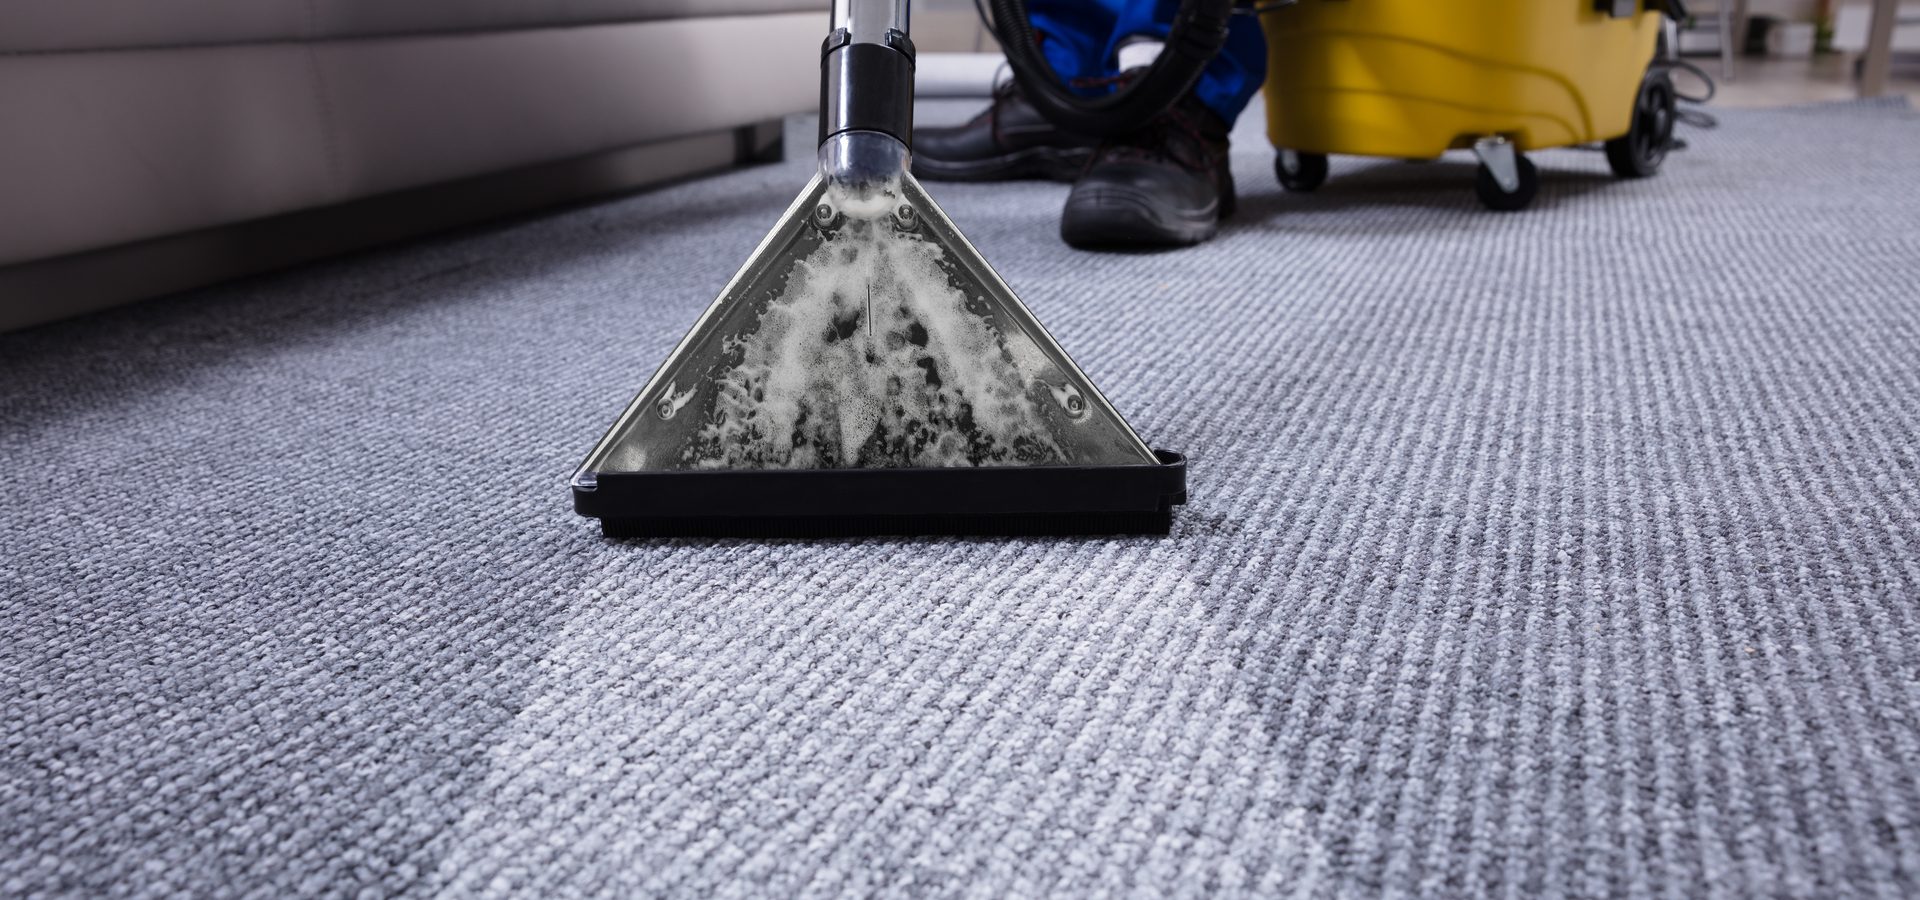 carpet cleaning machine being used to clean and office carpet